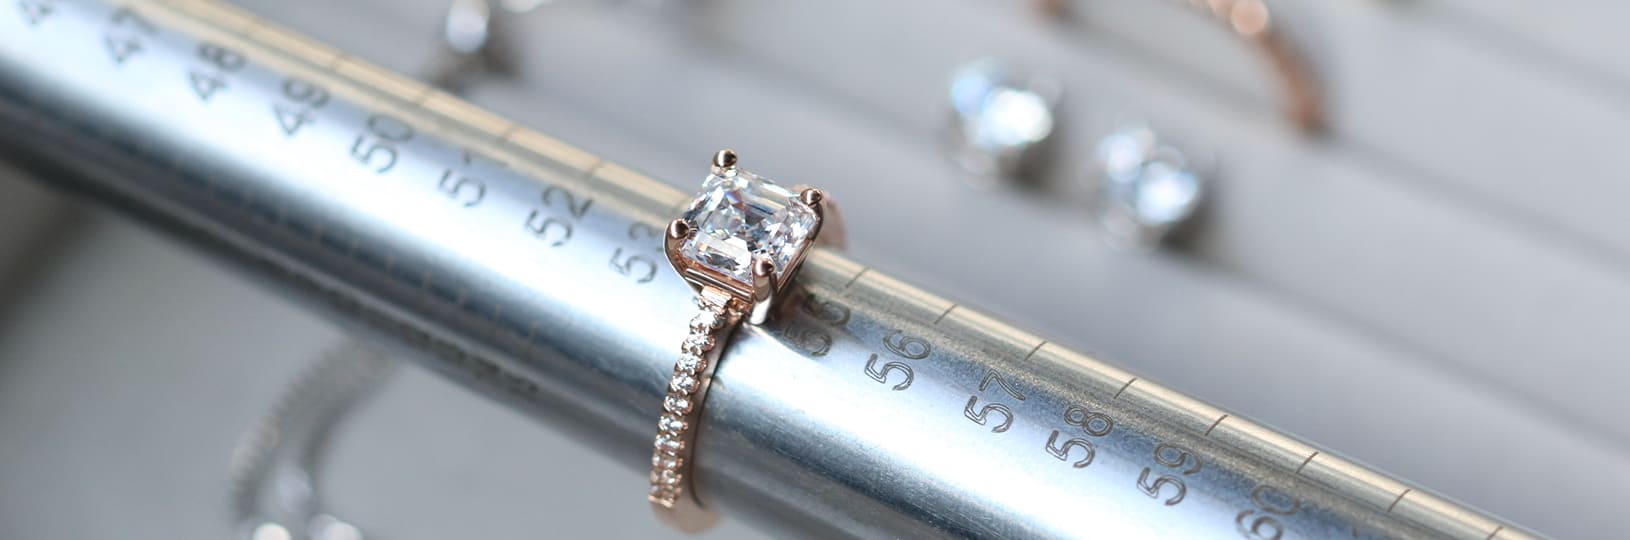 snijder huurder Min My Engagement Ring Is Too Small: Now What? | 12FIFTEEN Diamonds